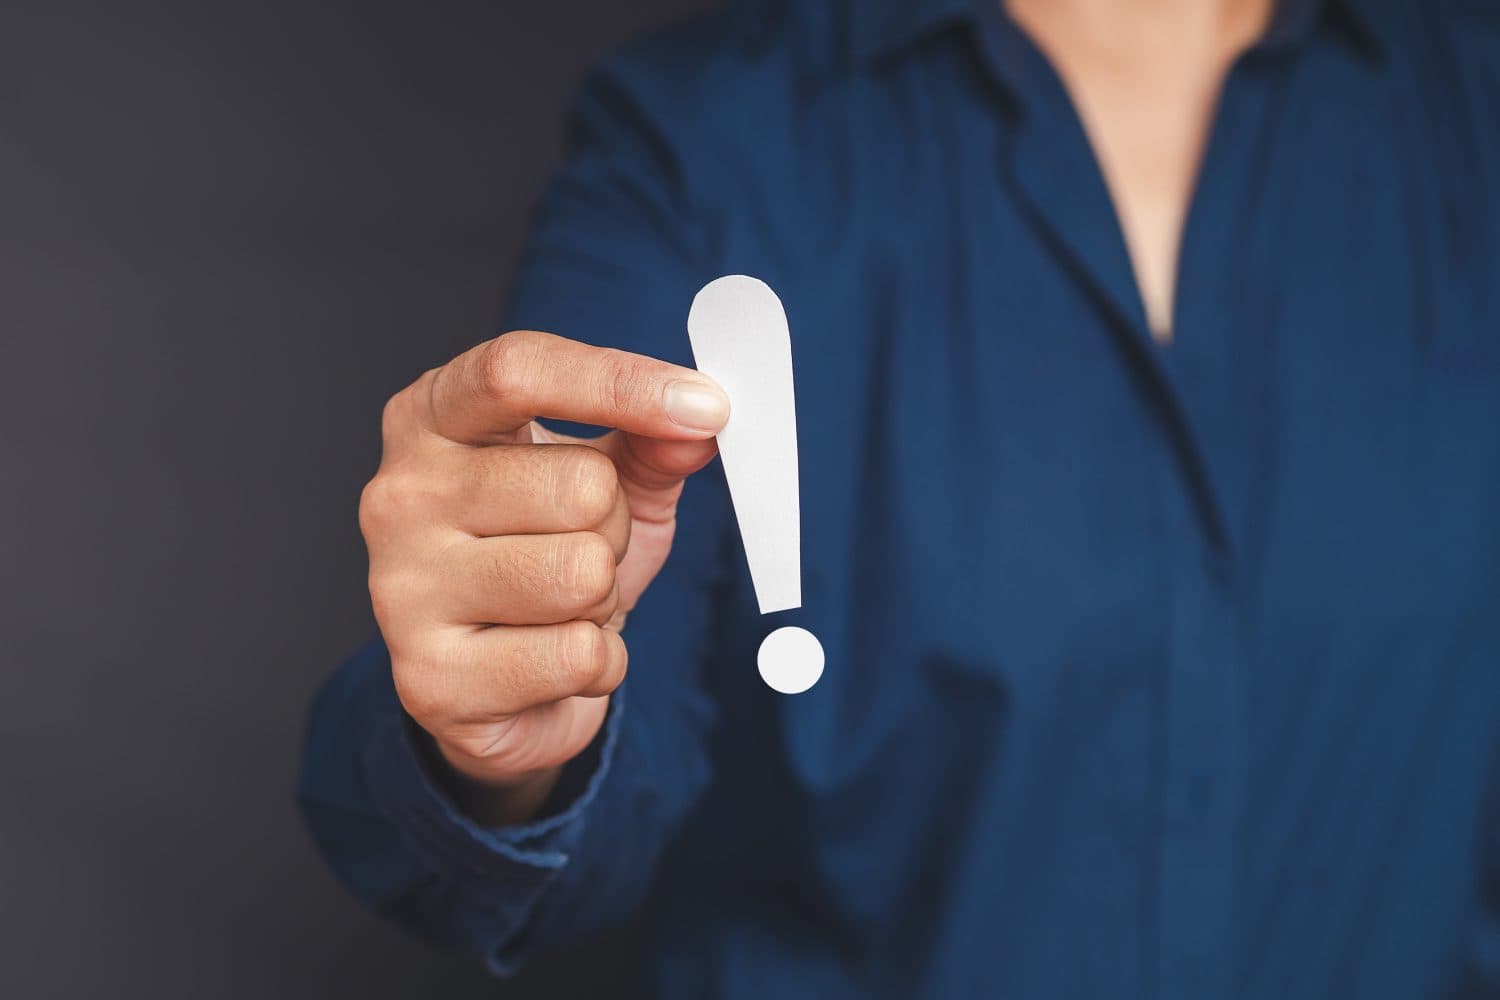 Exclamation mark concept. Hand of a businesswoman in a blue shirt holding a white exclamation mark while standing on a gray background. Business and development concept